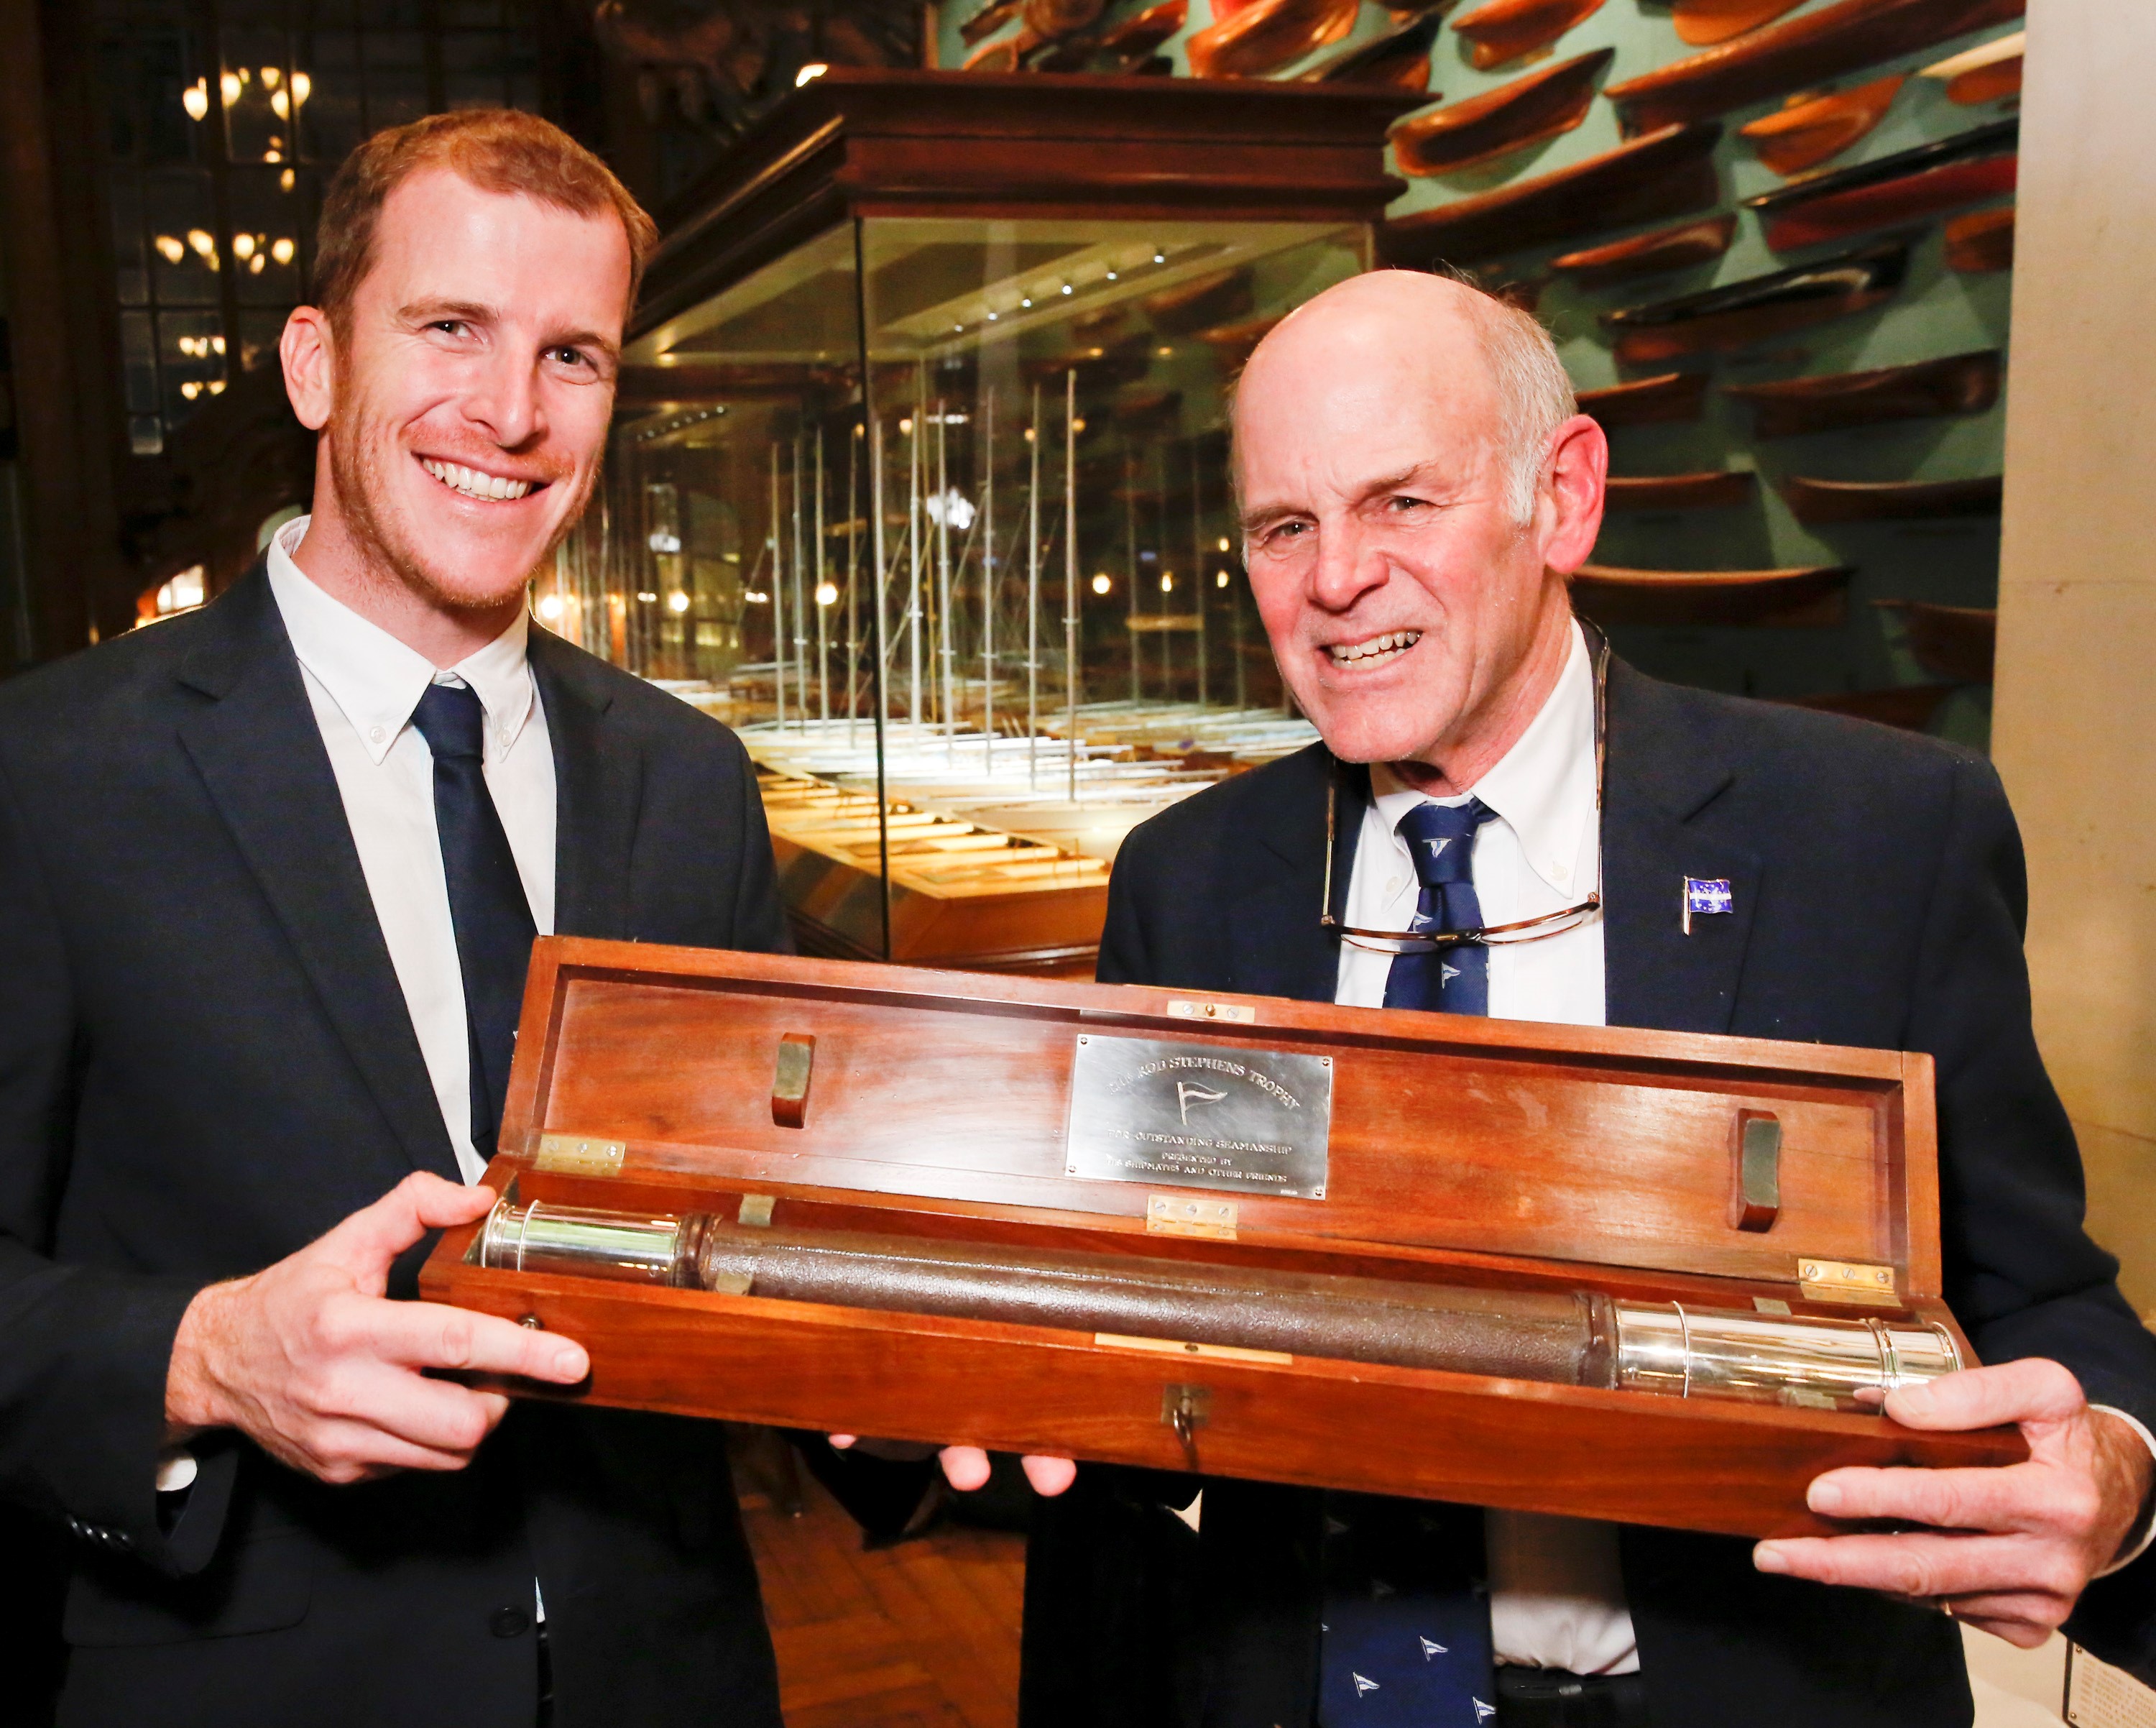 The trophy was presented by CCA Commodore Tad Lhamon at their annual awards ceremony in the New York Yacht Club in recognition of how the Derry~Londonderry~Doire skipper 